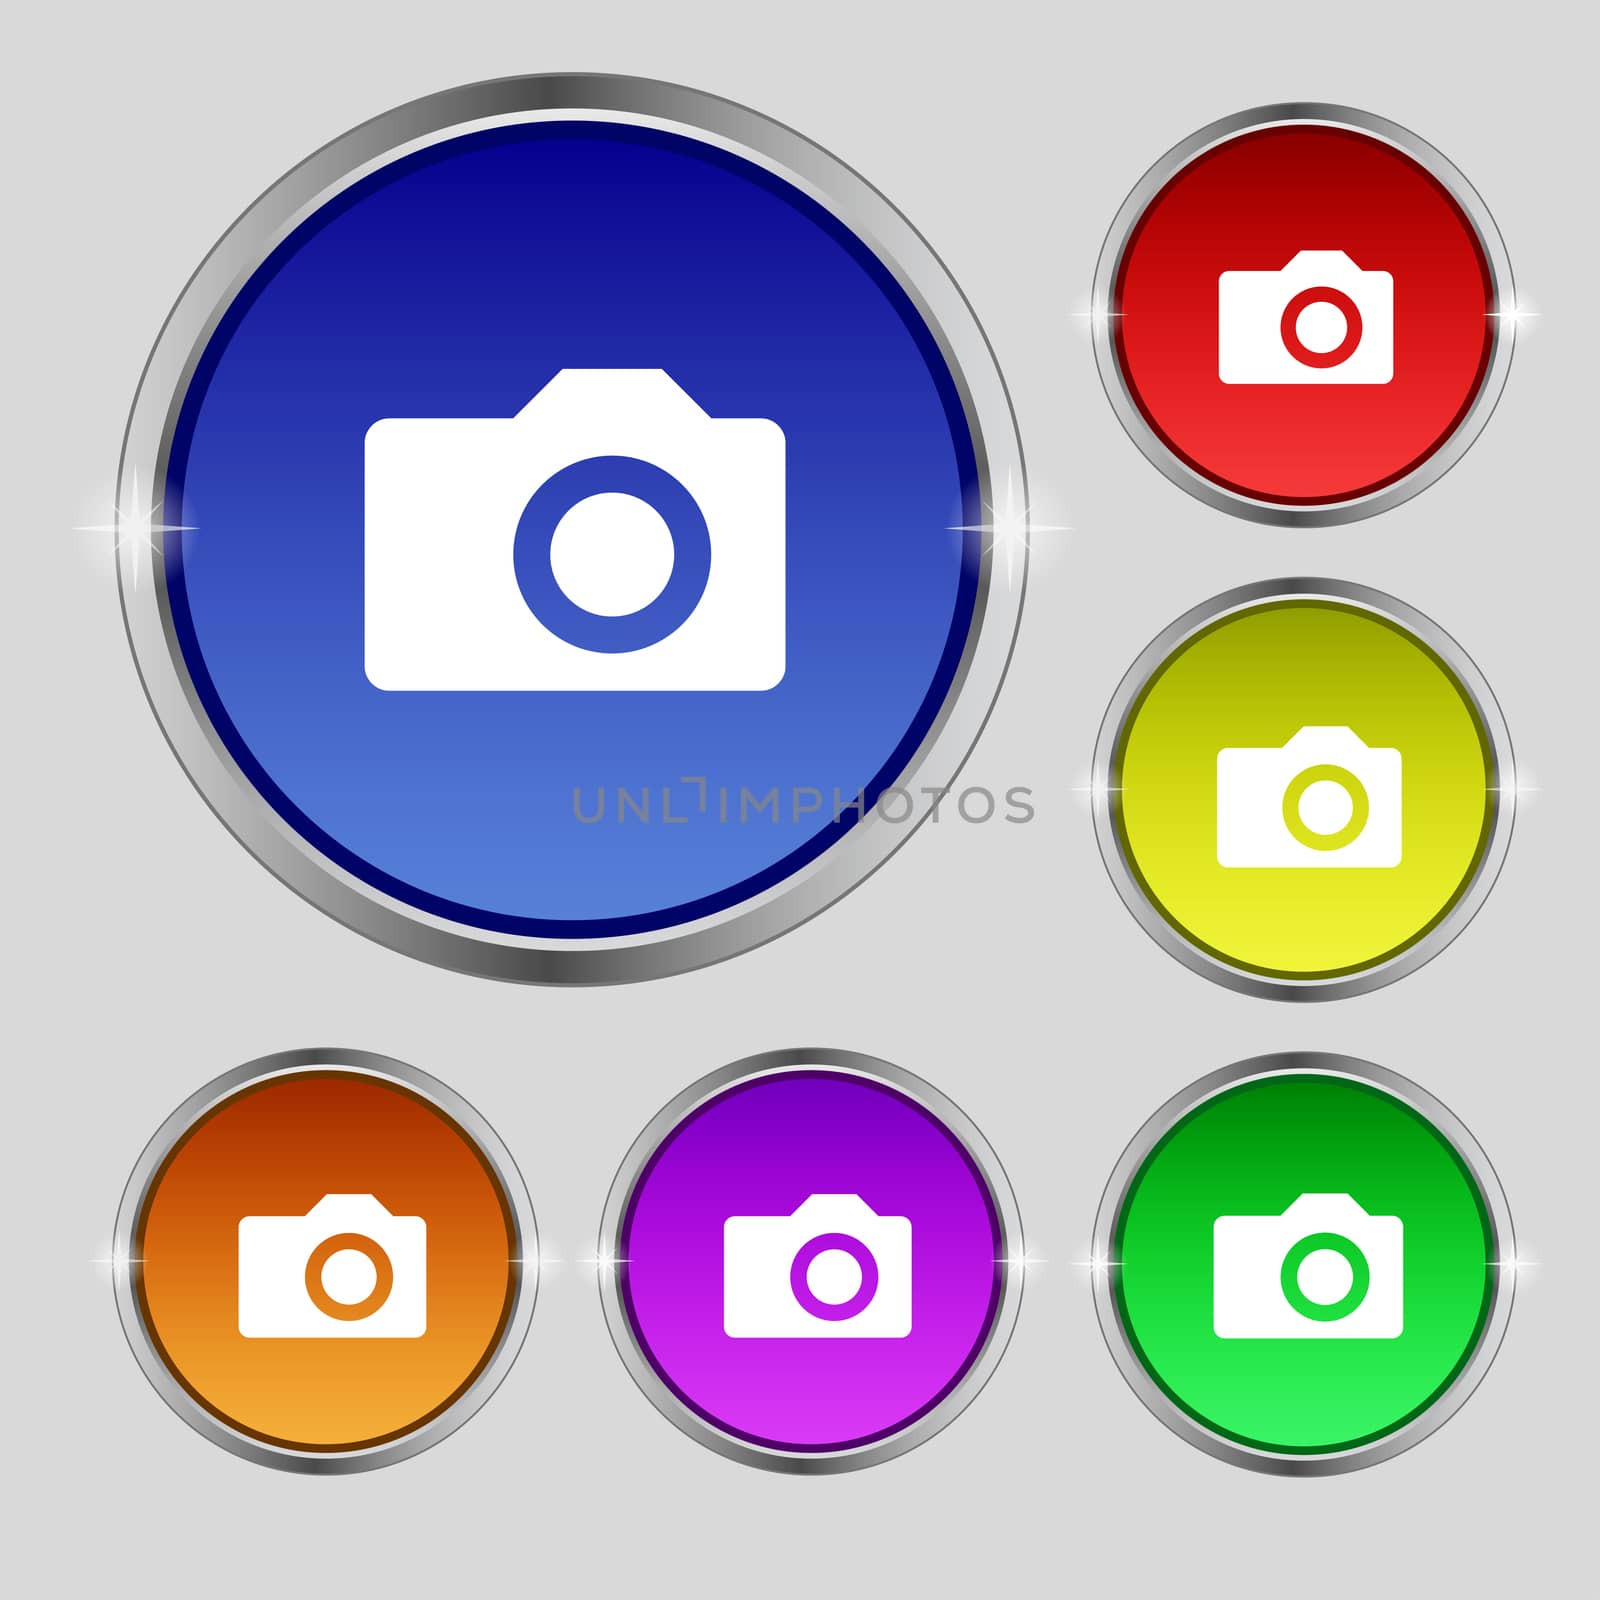 Digital photo camera icon sign. Round symbol on bright colourful buttons. illustration